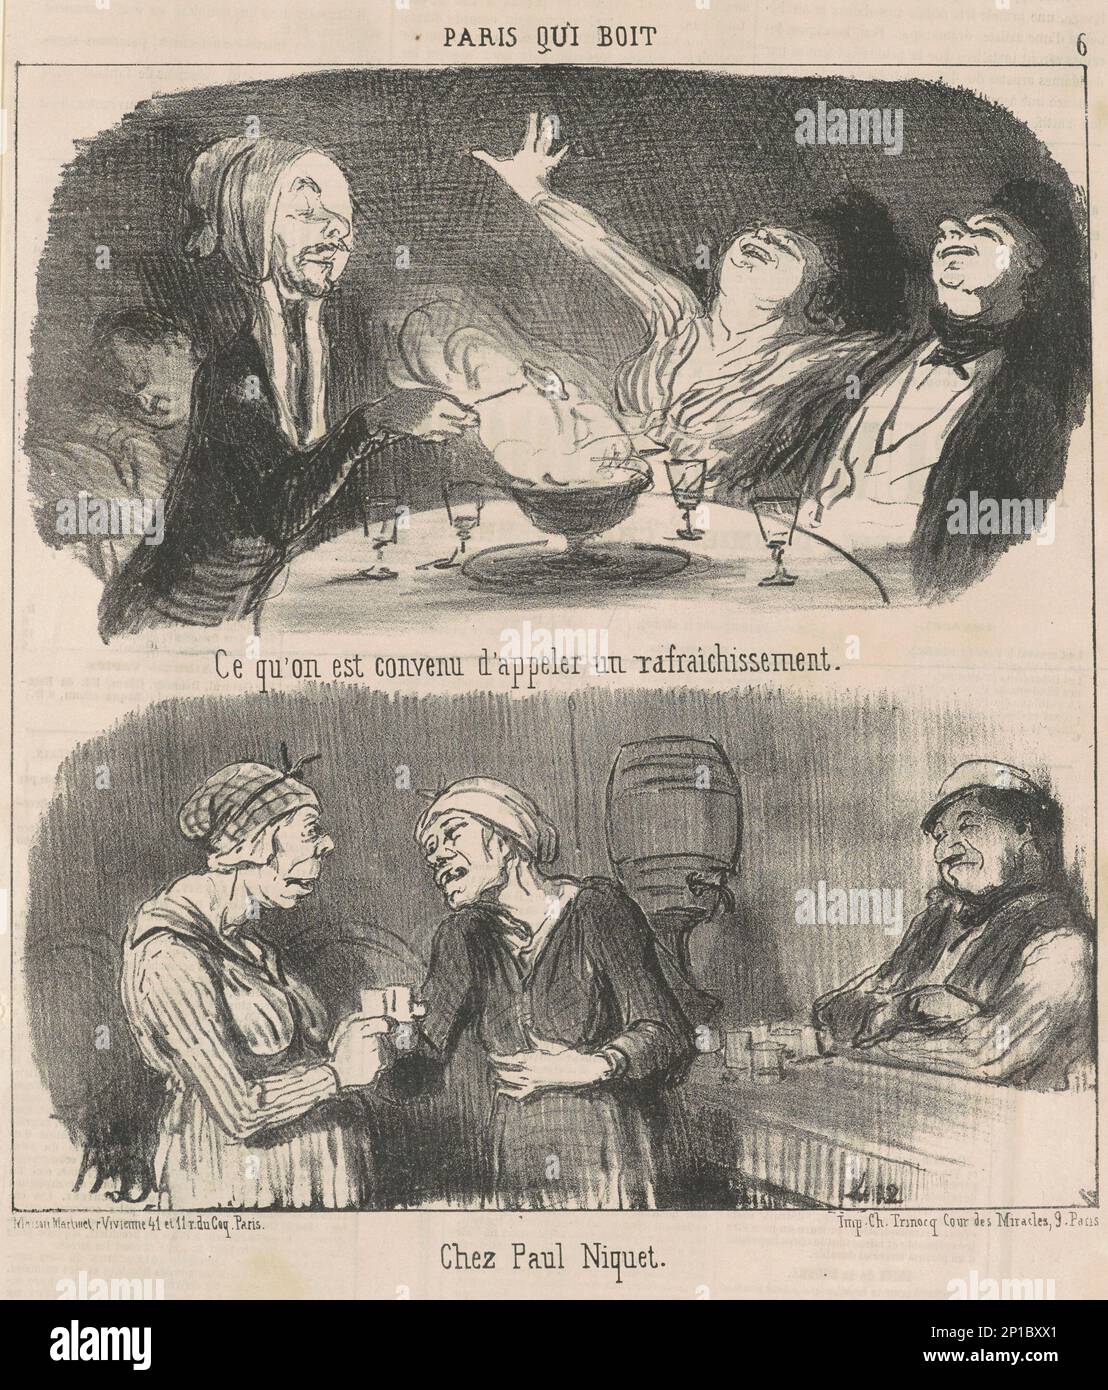 Ce qu'on est convenu d'appeler un rafraichissement, 19th century. Parisian drinkers. What one agrees to call a refreshment [man in bonnet with fondue, above]. At Paul Niquet's [women drinking in a bar, below]. Stock Photo